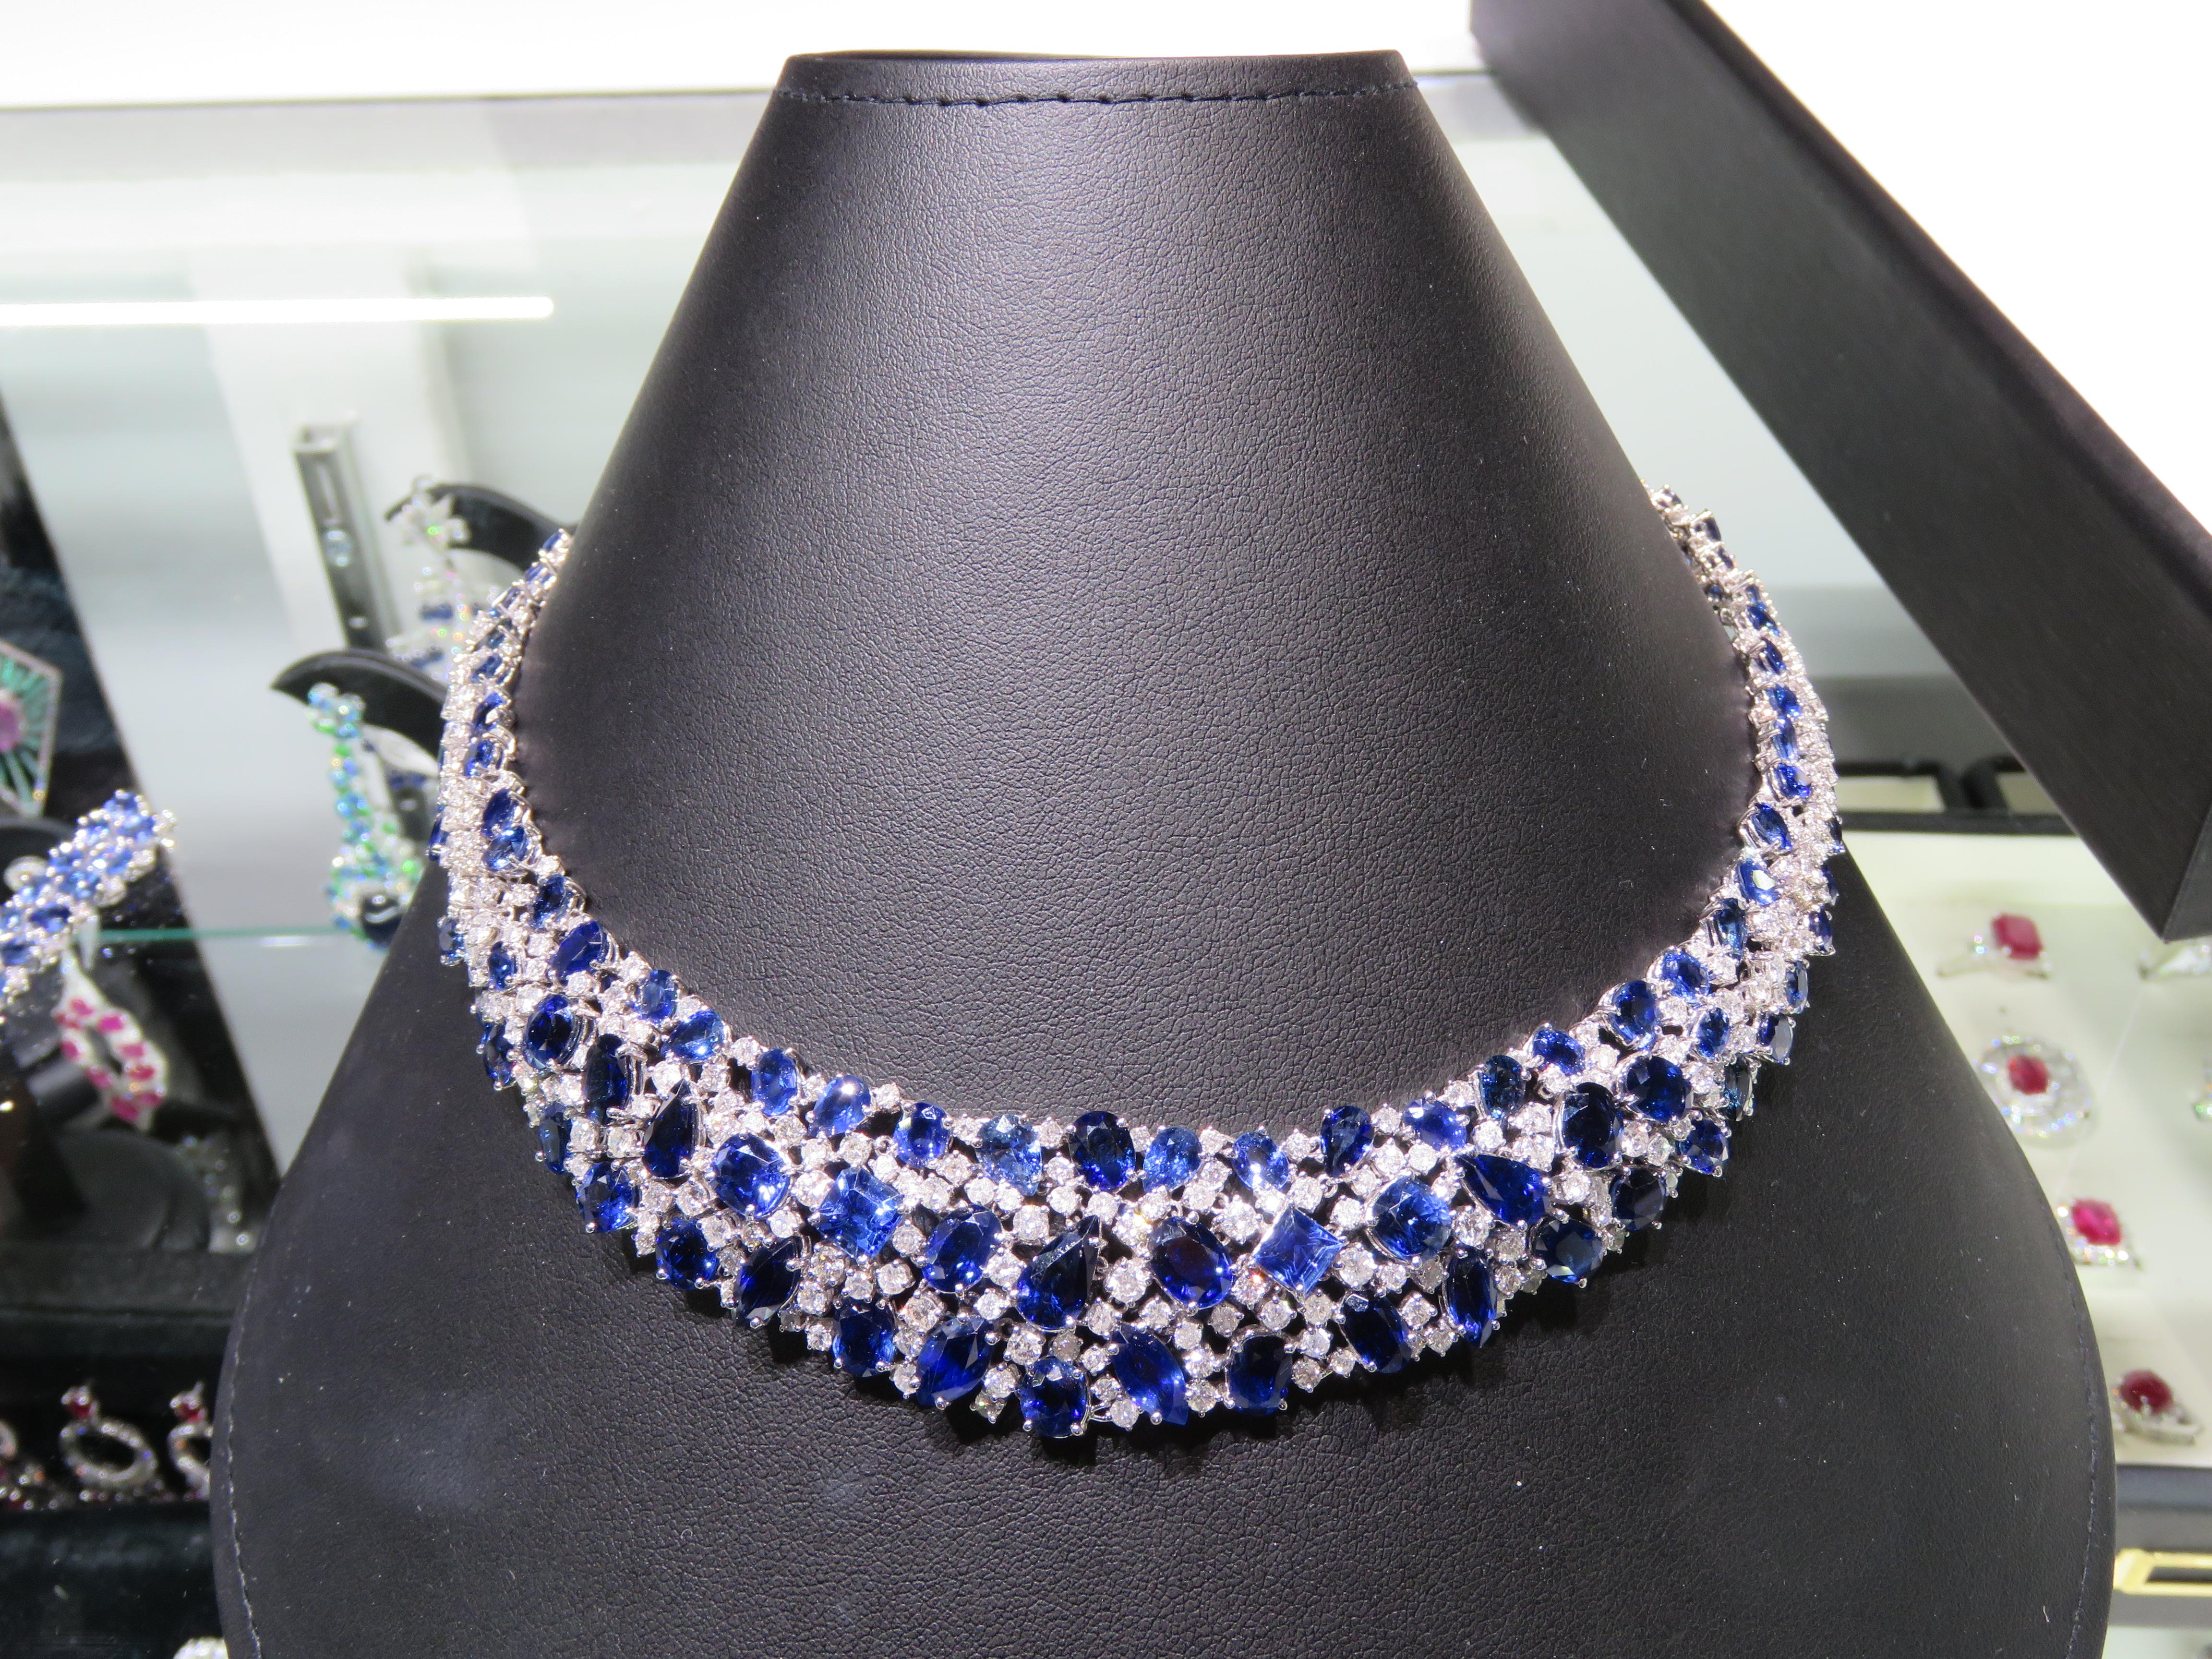 A Rare 18KT White Gold Ceylon Sapphire Diamond Necklace. Necklace is comprised of Finely Set Glittering Gorgeous Ceylon Sapphire Bracelet and adorned with Sparkling Round Diamonds!! T.C.W. approx 90CTS!!! This Gorgeous Necklace is a Sample Piece